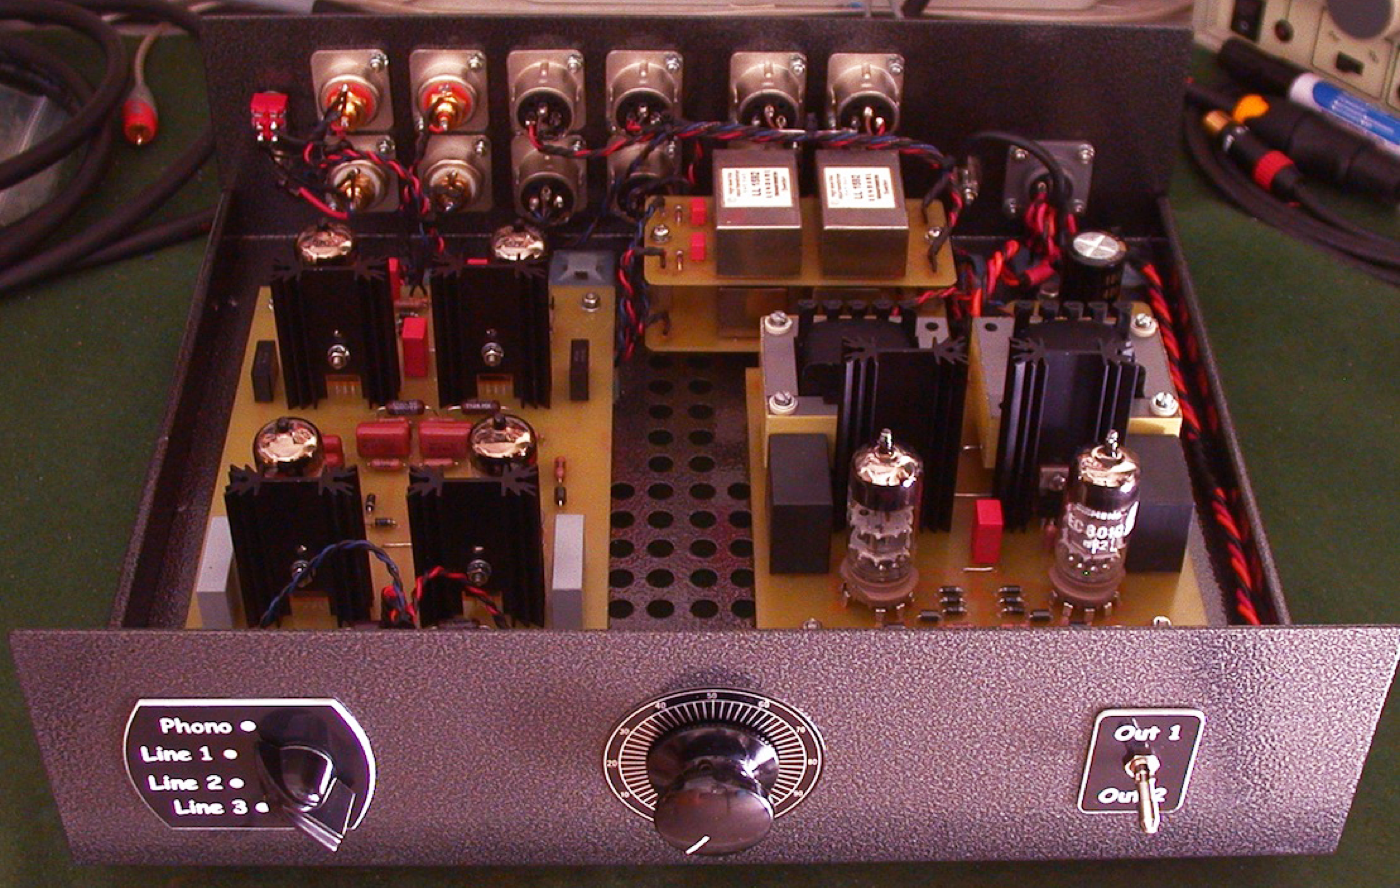 Preamplifier with RIAA filter.